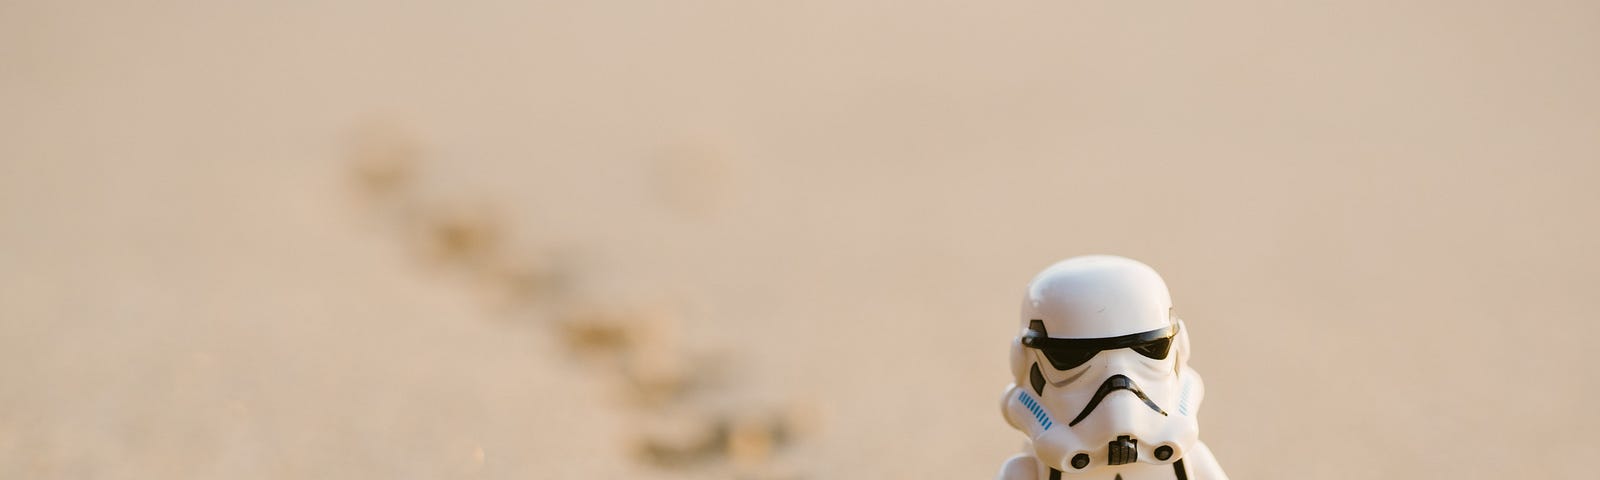 Photo by Daniel Cheung of a Lego Stormtrooper walking through the sand with footsteps behind him.